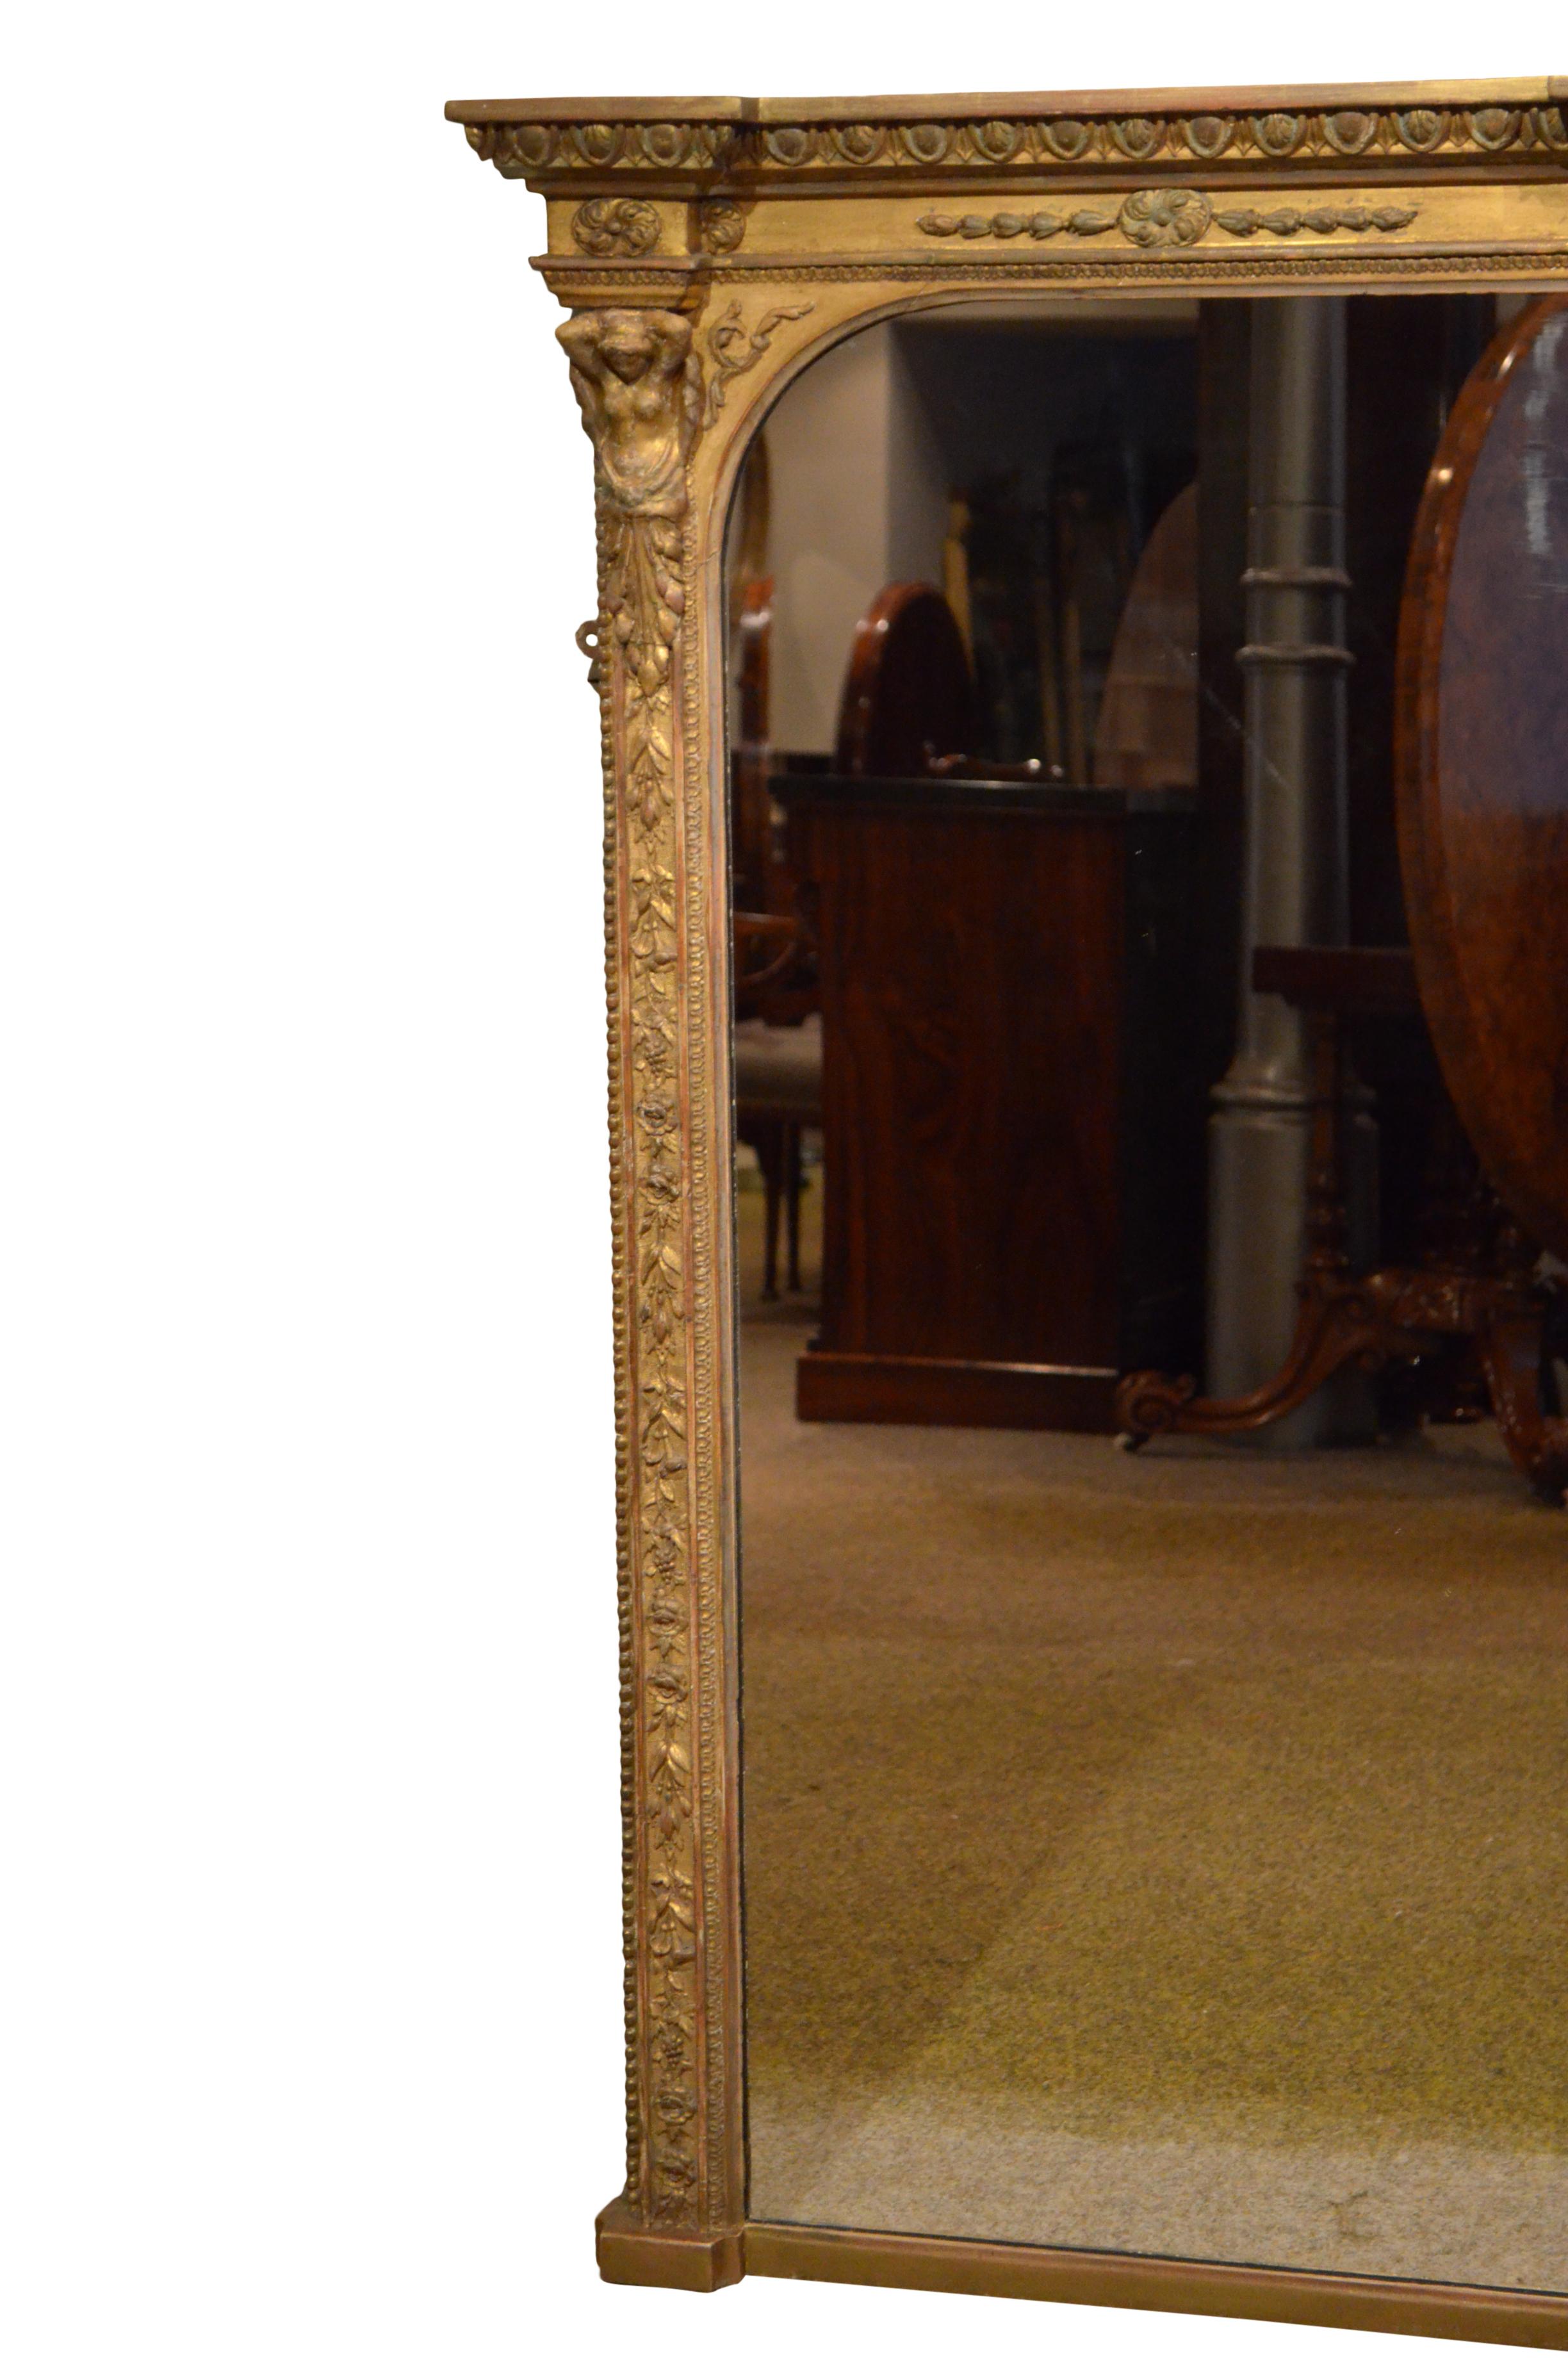 Superb English giltwood overmantel mirror, having a replacement glass in carved, beaded and floral decorated gilded frame with egg and dart carved cornice. This antique mirror retains its original finish and backboards, all in excellent home ready